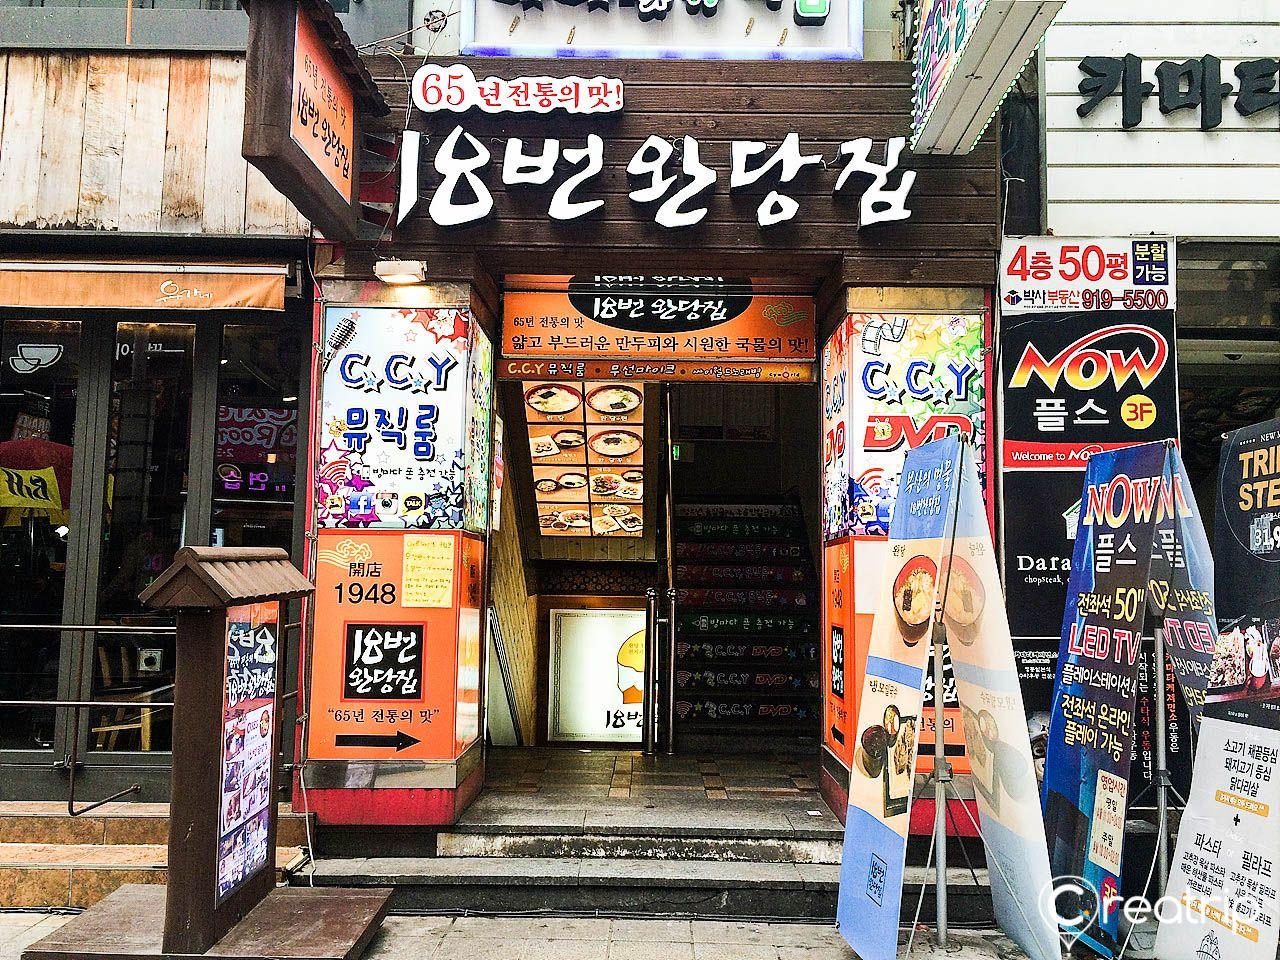 City storefront displaying advertising signage and typography on building facade with door and street in view.